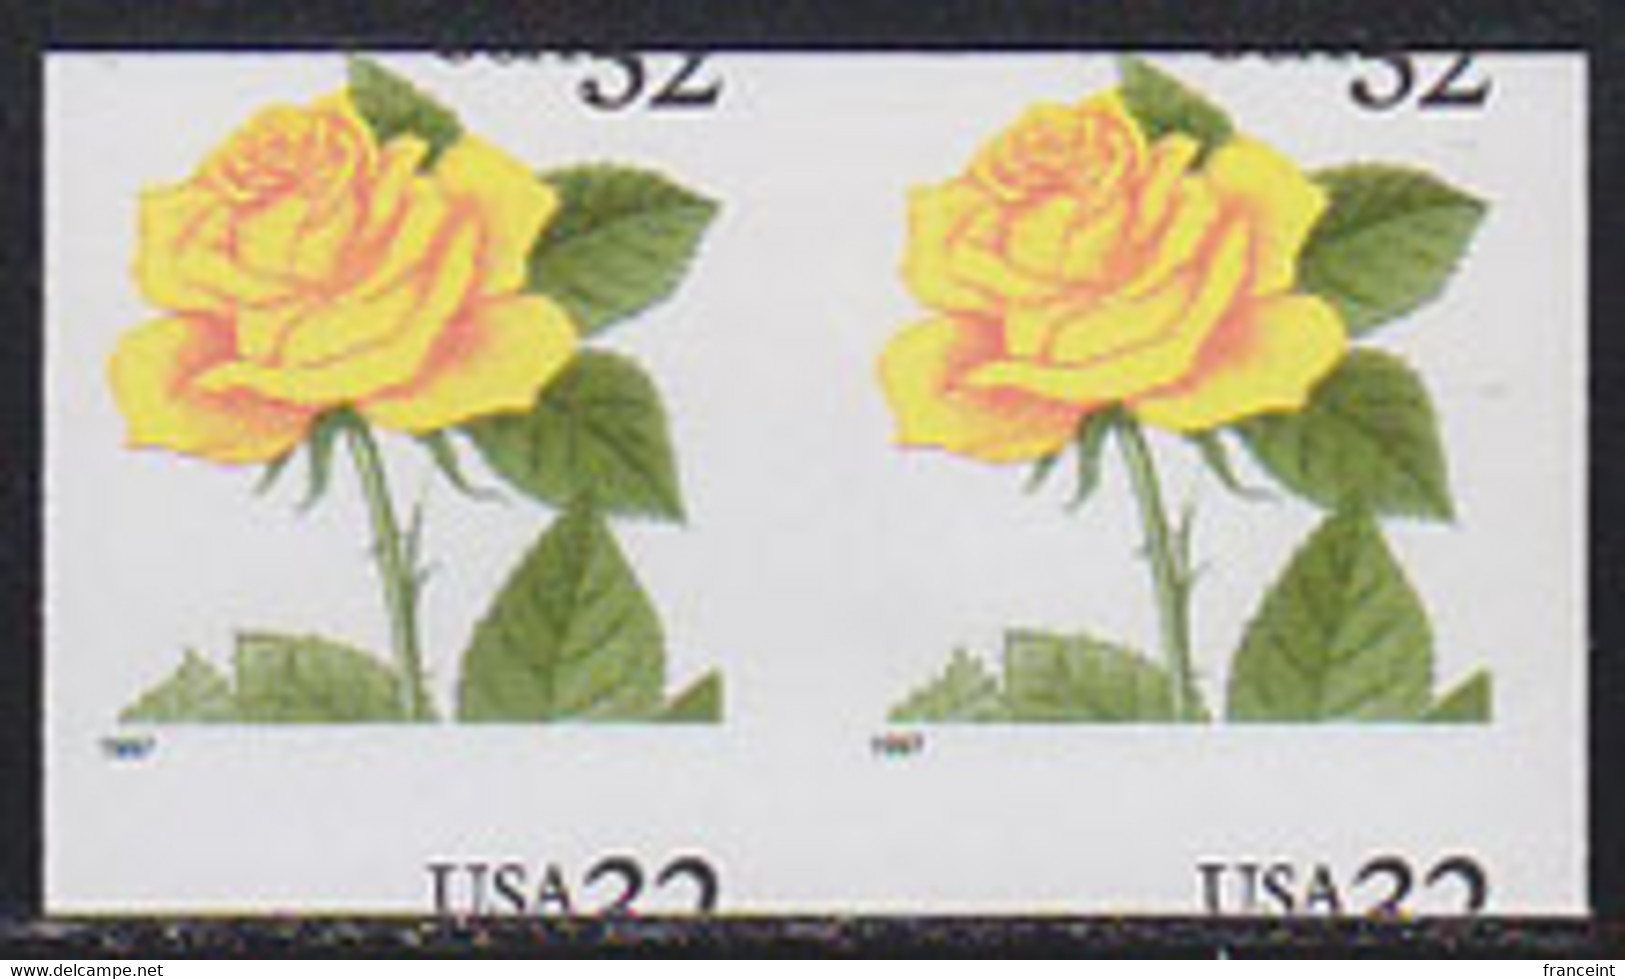 U.S.A. (1996) Yellow Rose. Imperforate Pair Horizontally Miscut In And Missing Die Cuts. Scott No 3054, Yvert No 2568. - Errors, Freaks & Oddities (EFOs)